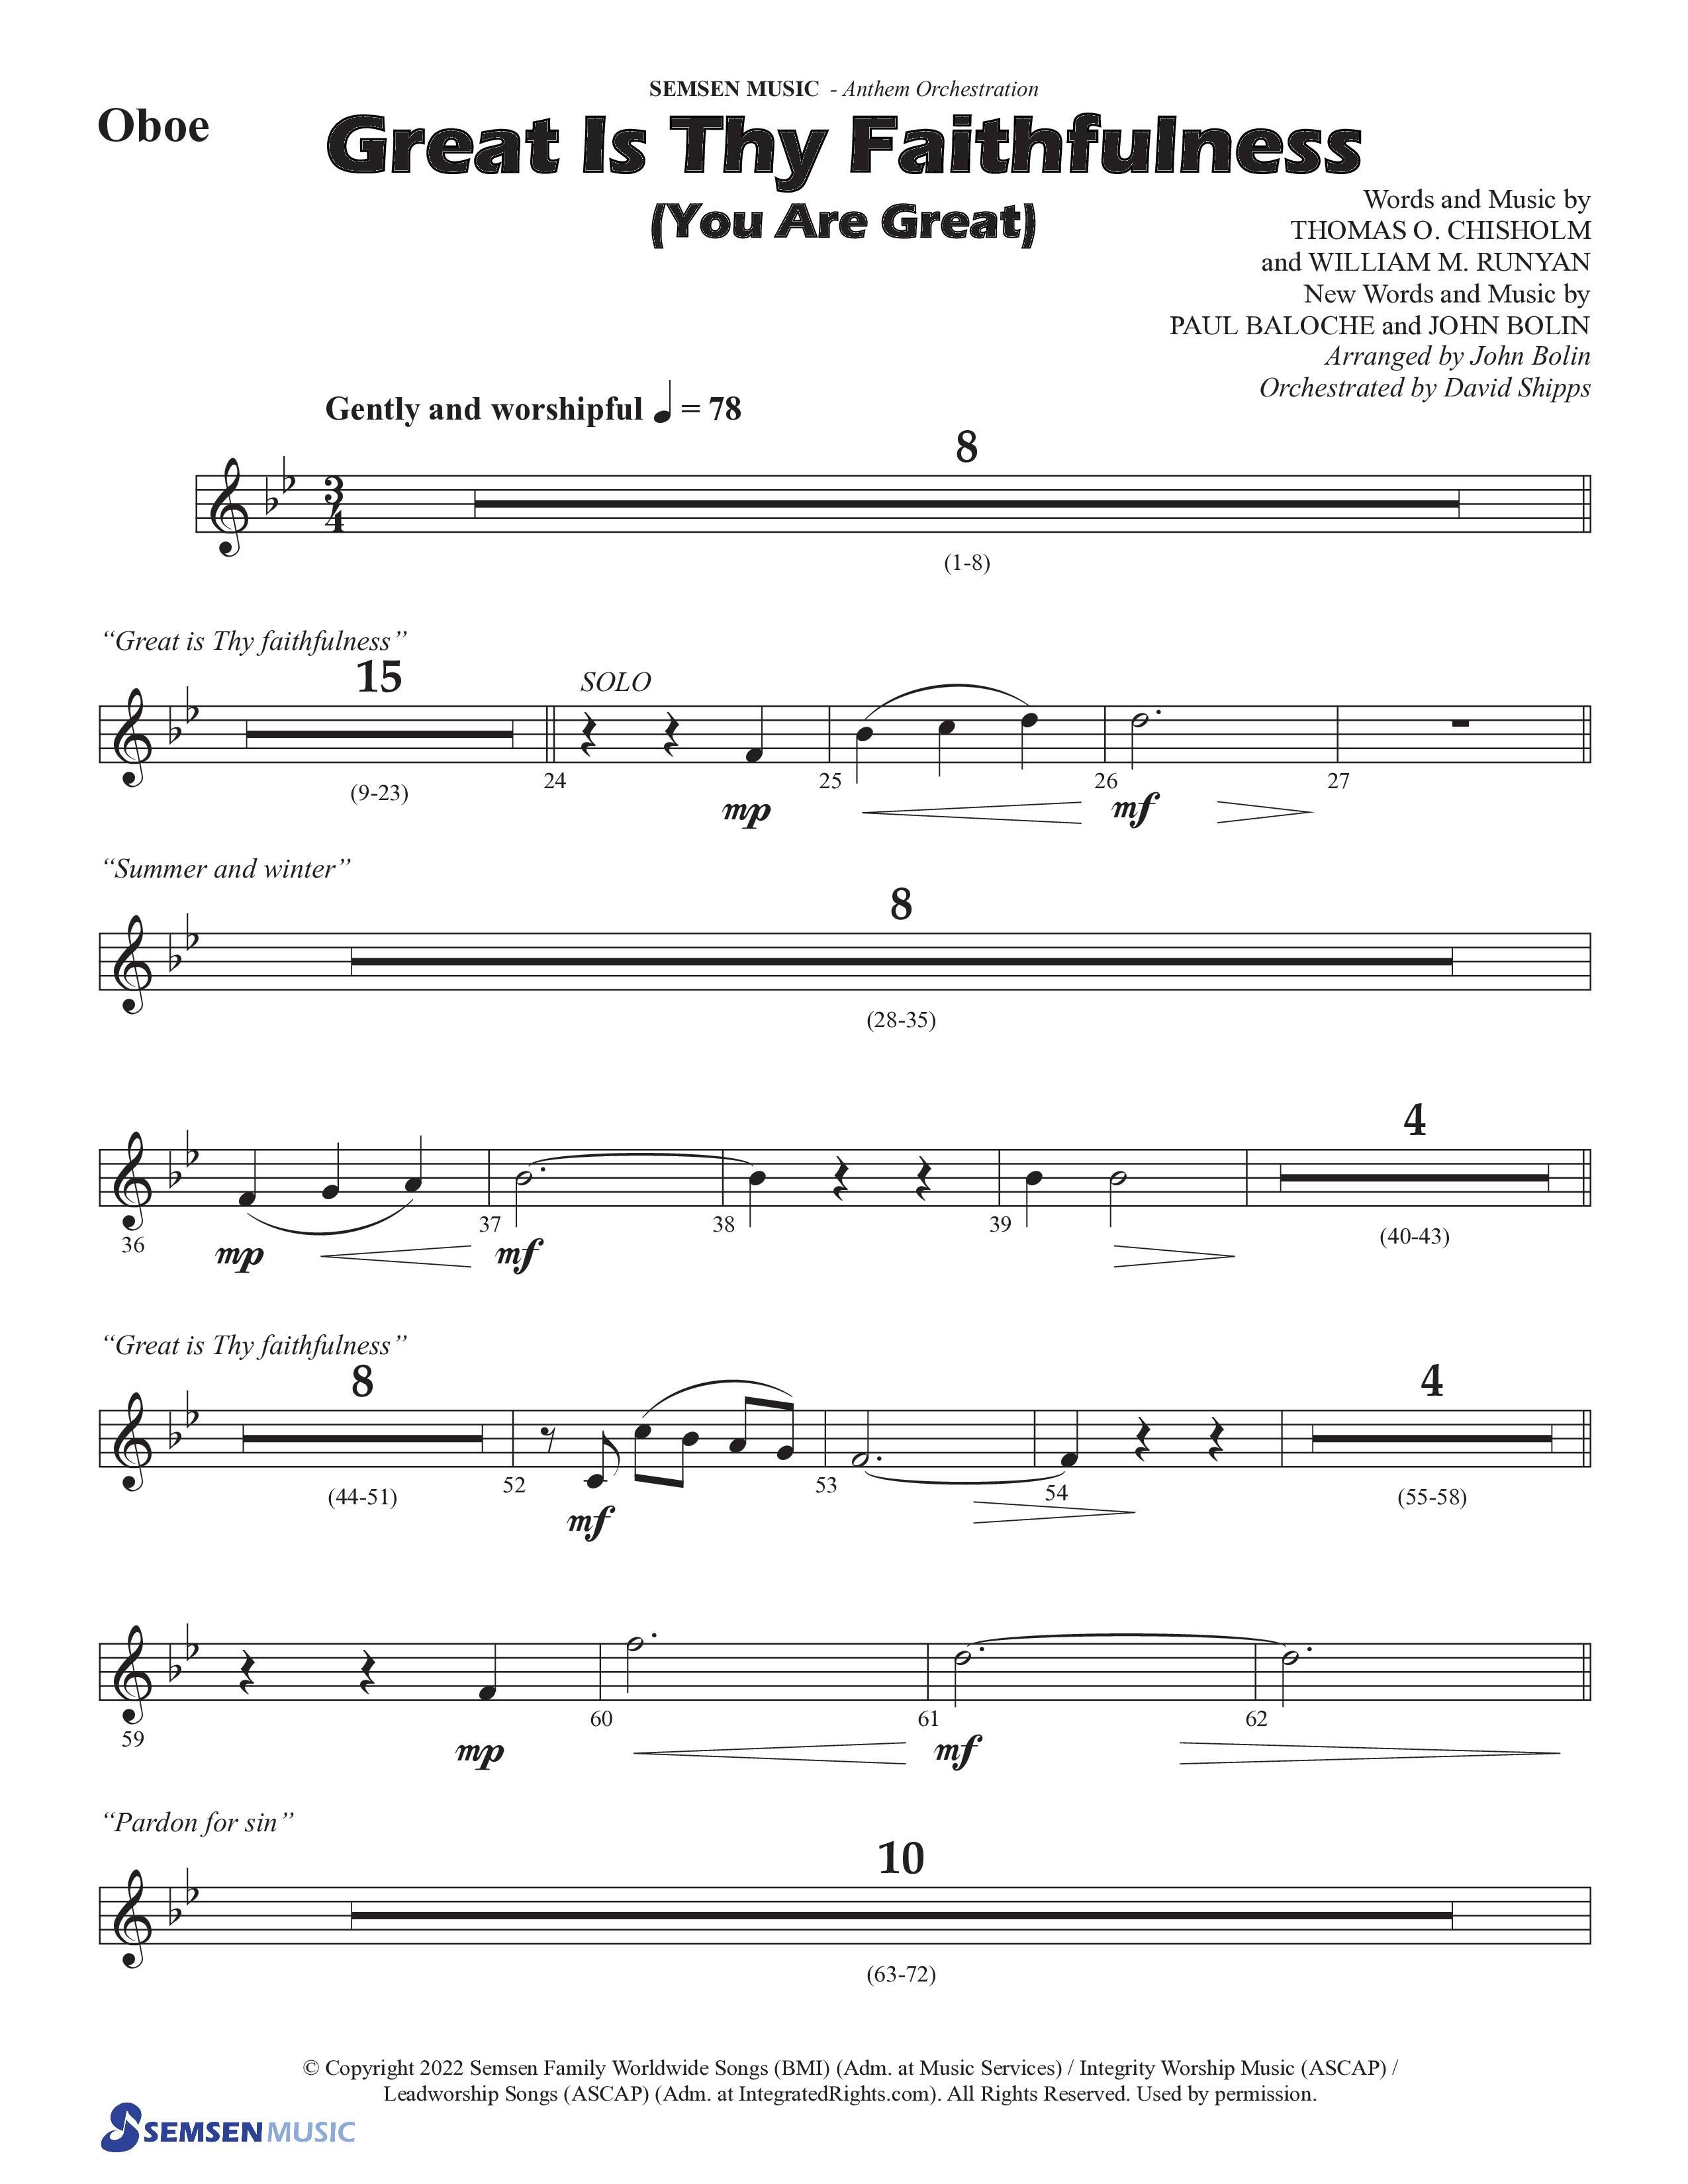 Great Is Thy Faithfulness (You Are Great) (Choral Anthem SATB) Oboe (Semsen Music / Arr. John Bolin / Orch. David Shipps)